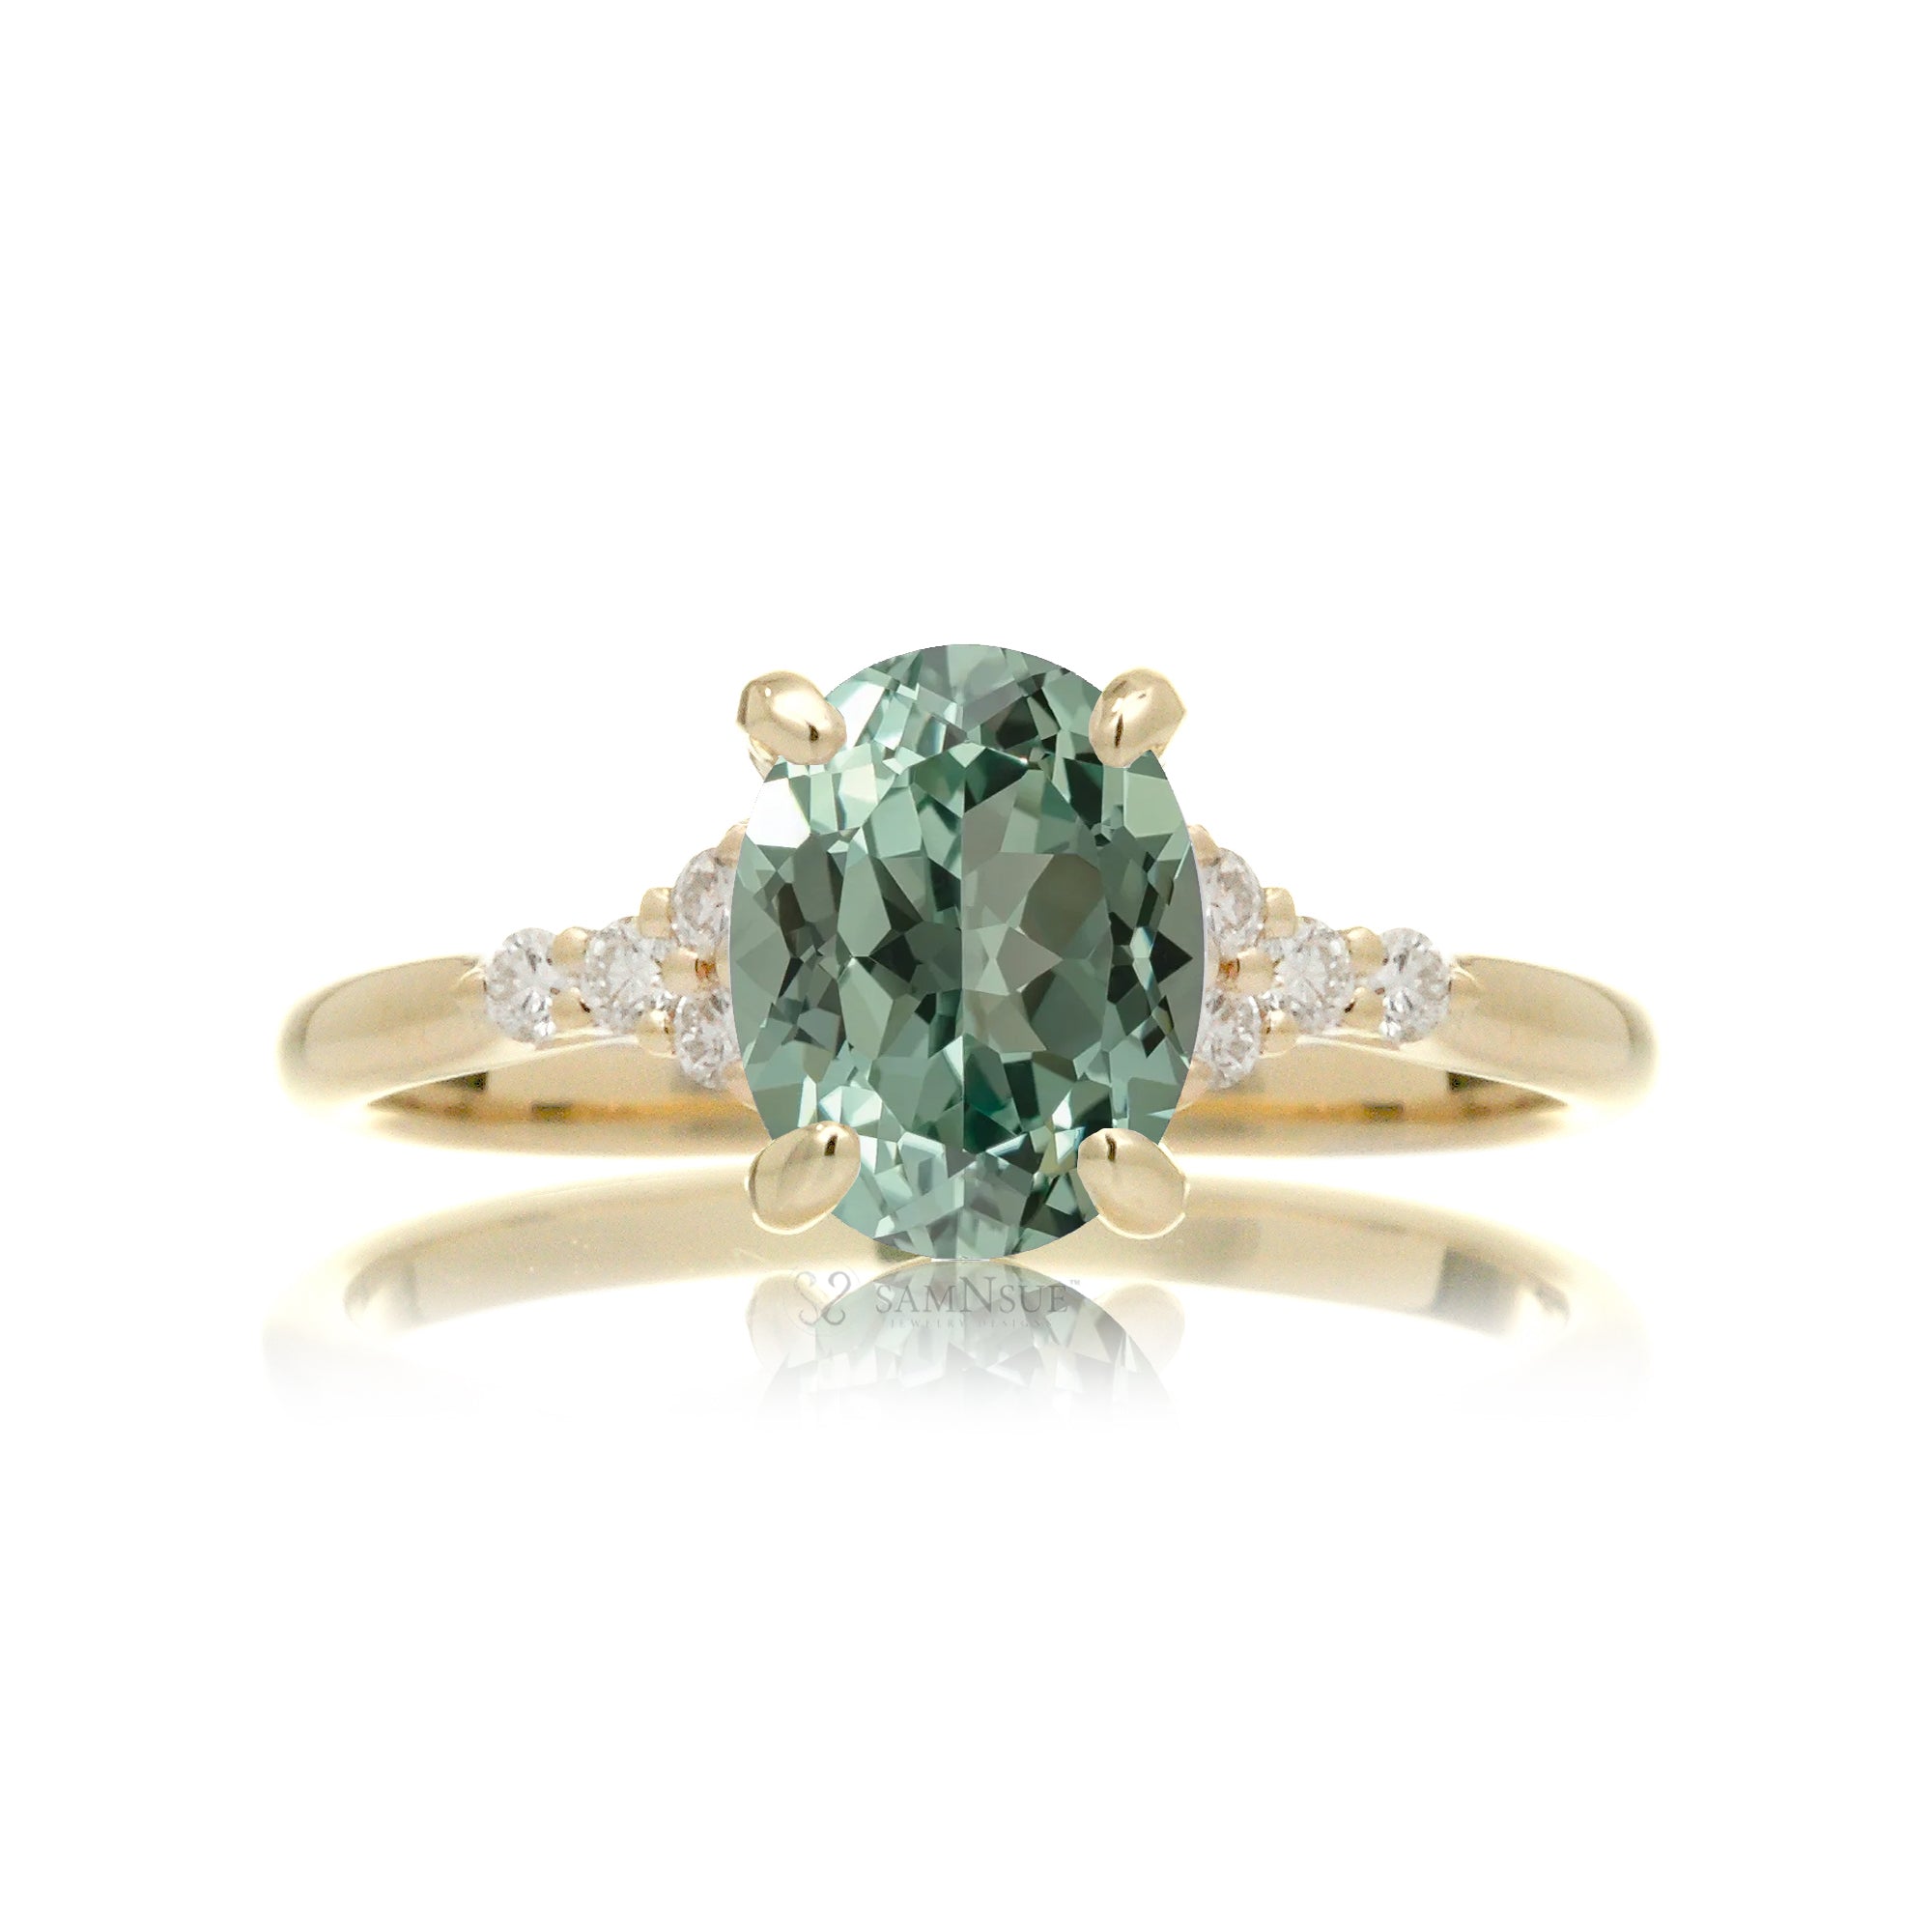 Oval green sapphire diamond ring in yellow gold with a comfort fit band - the Chloe ring